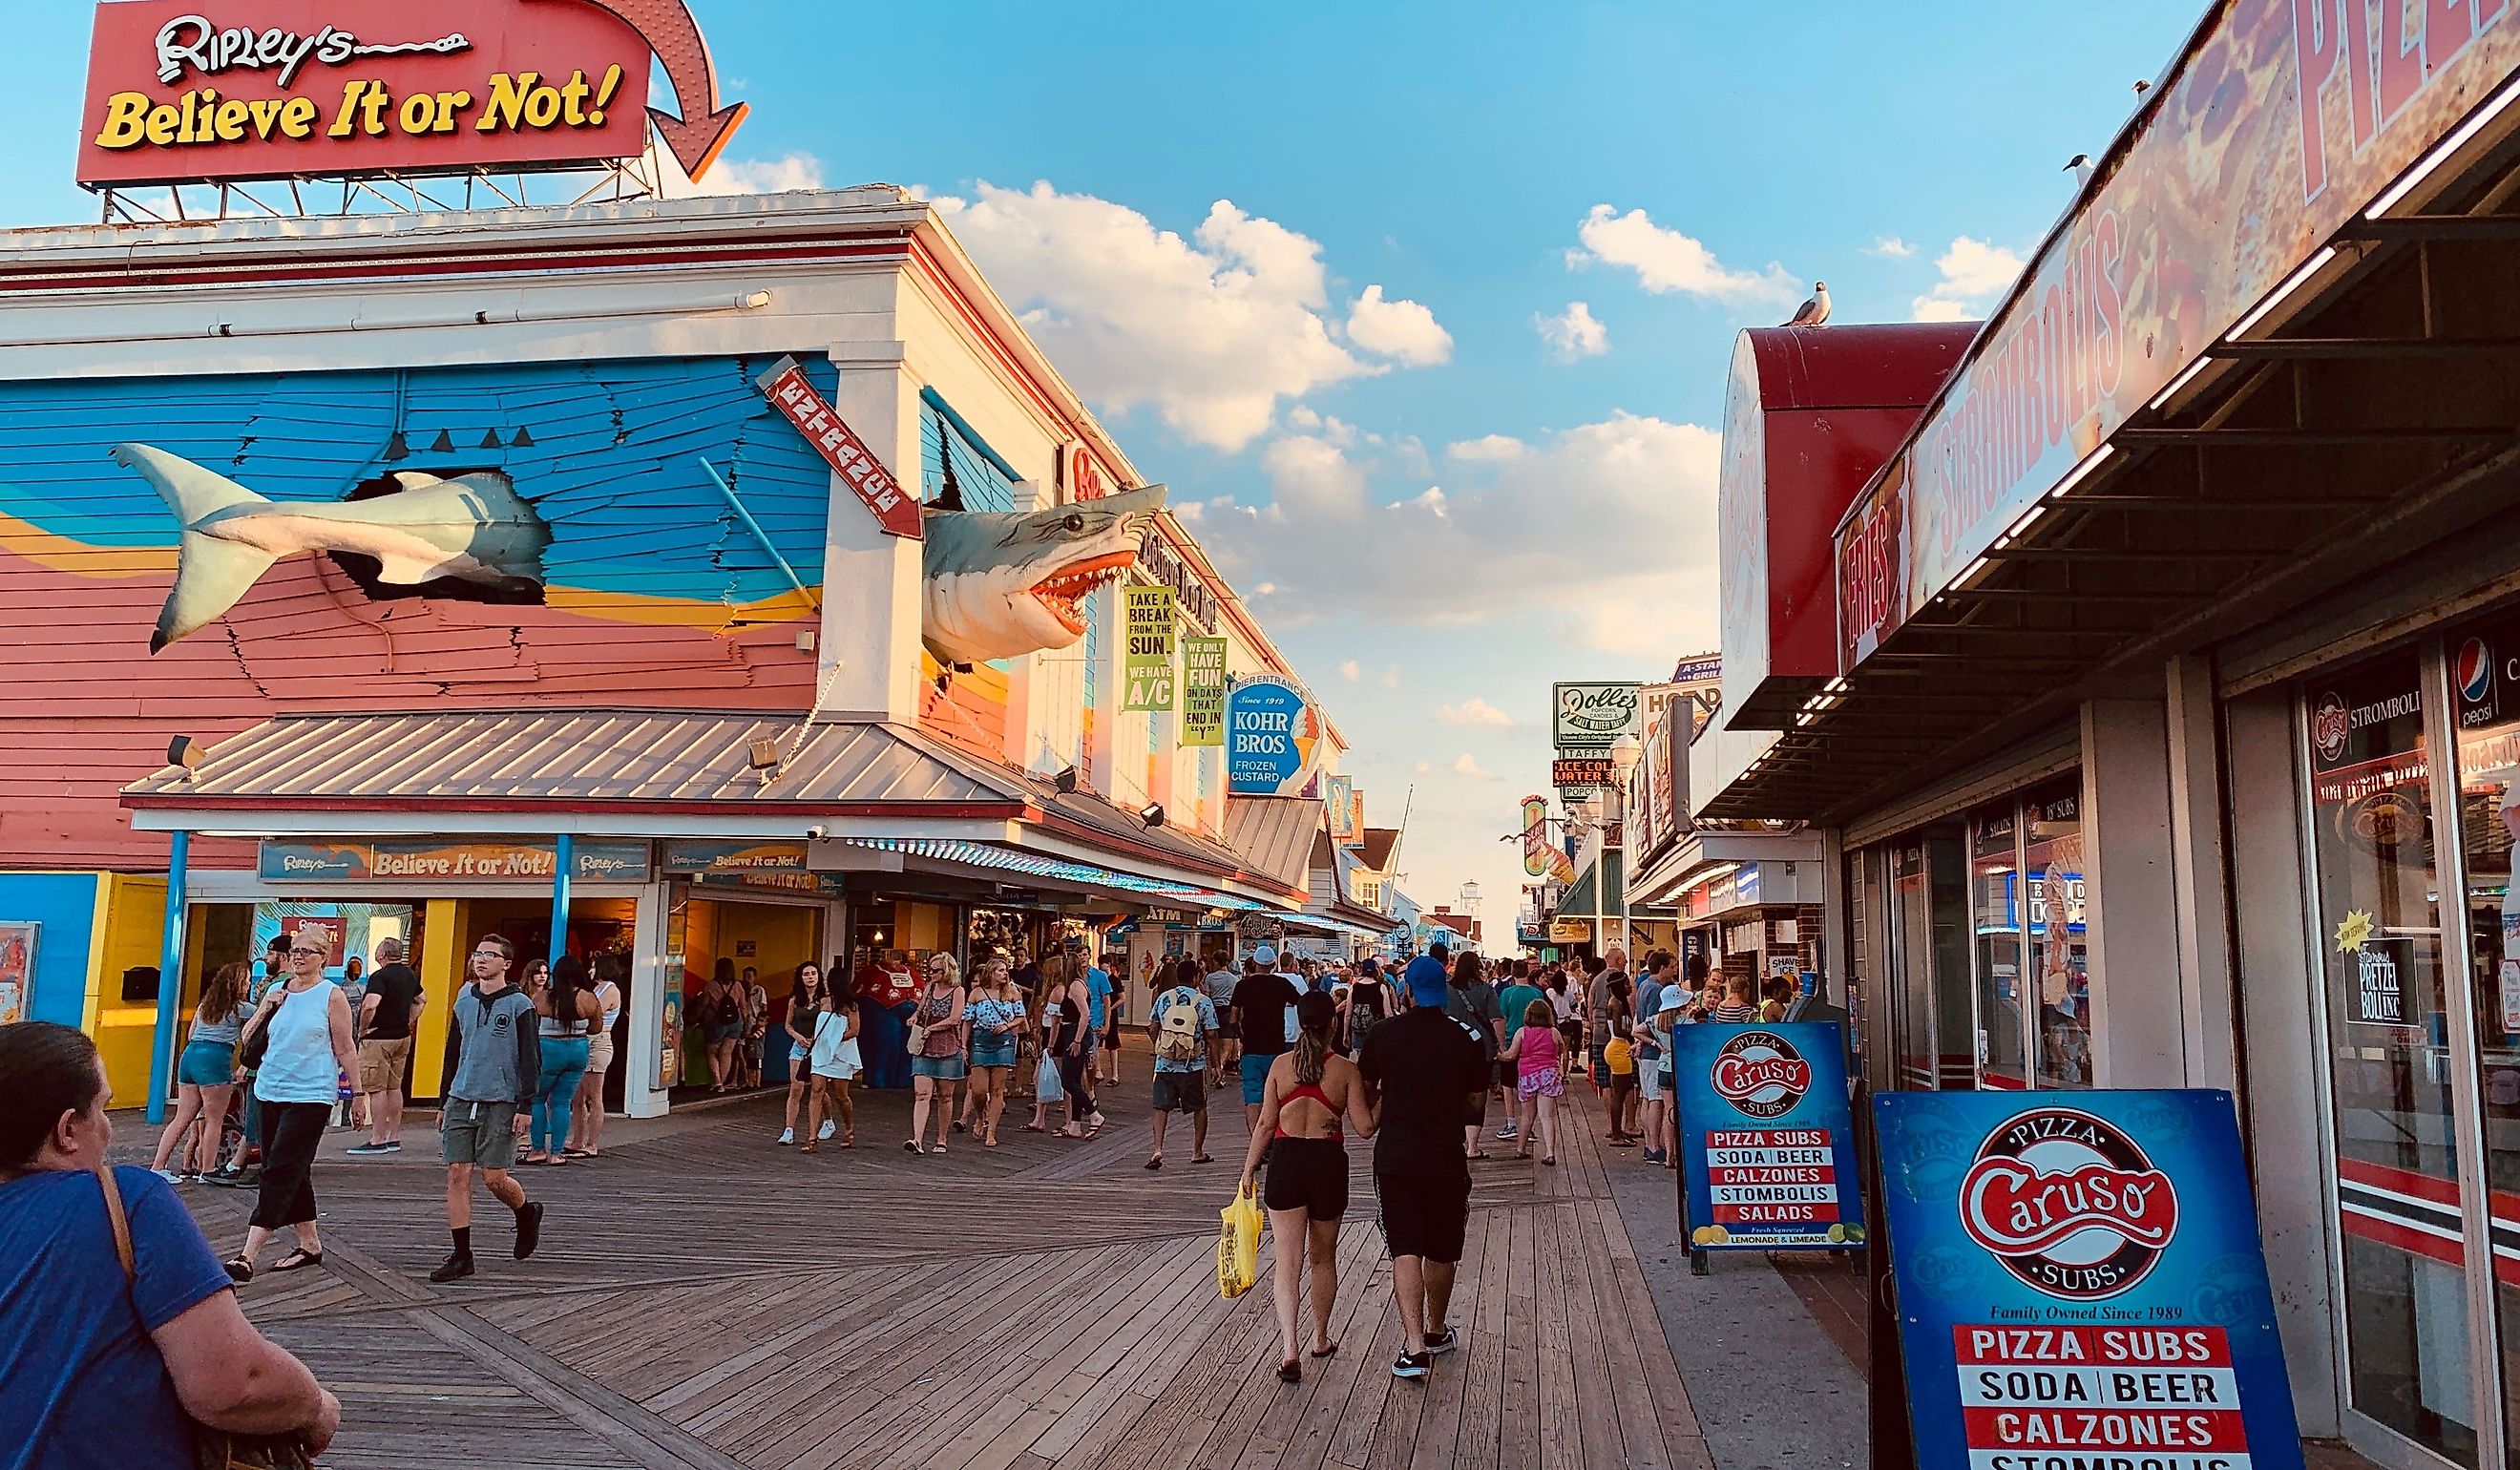 Ocean City, Maryland/United States. Editorial credit: Yeilyn Channell / Shutterstock.com